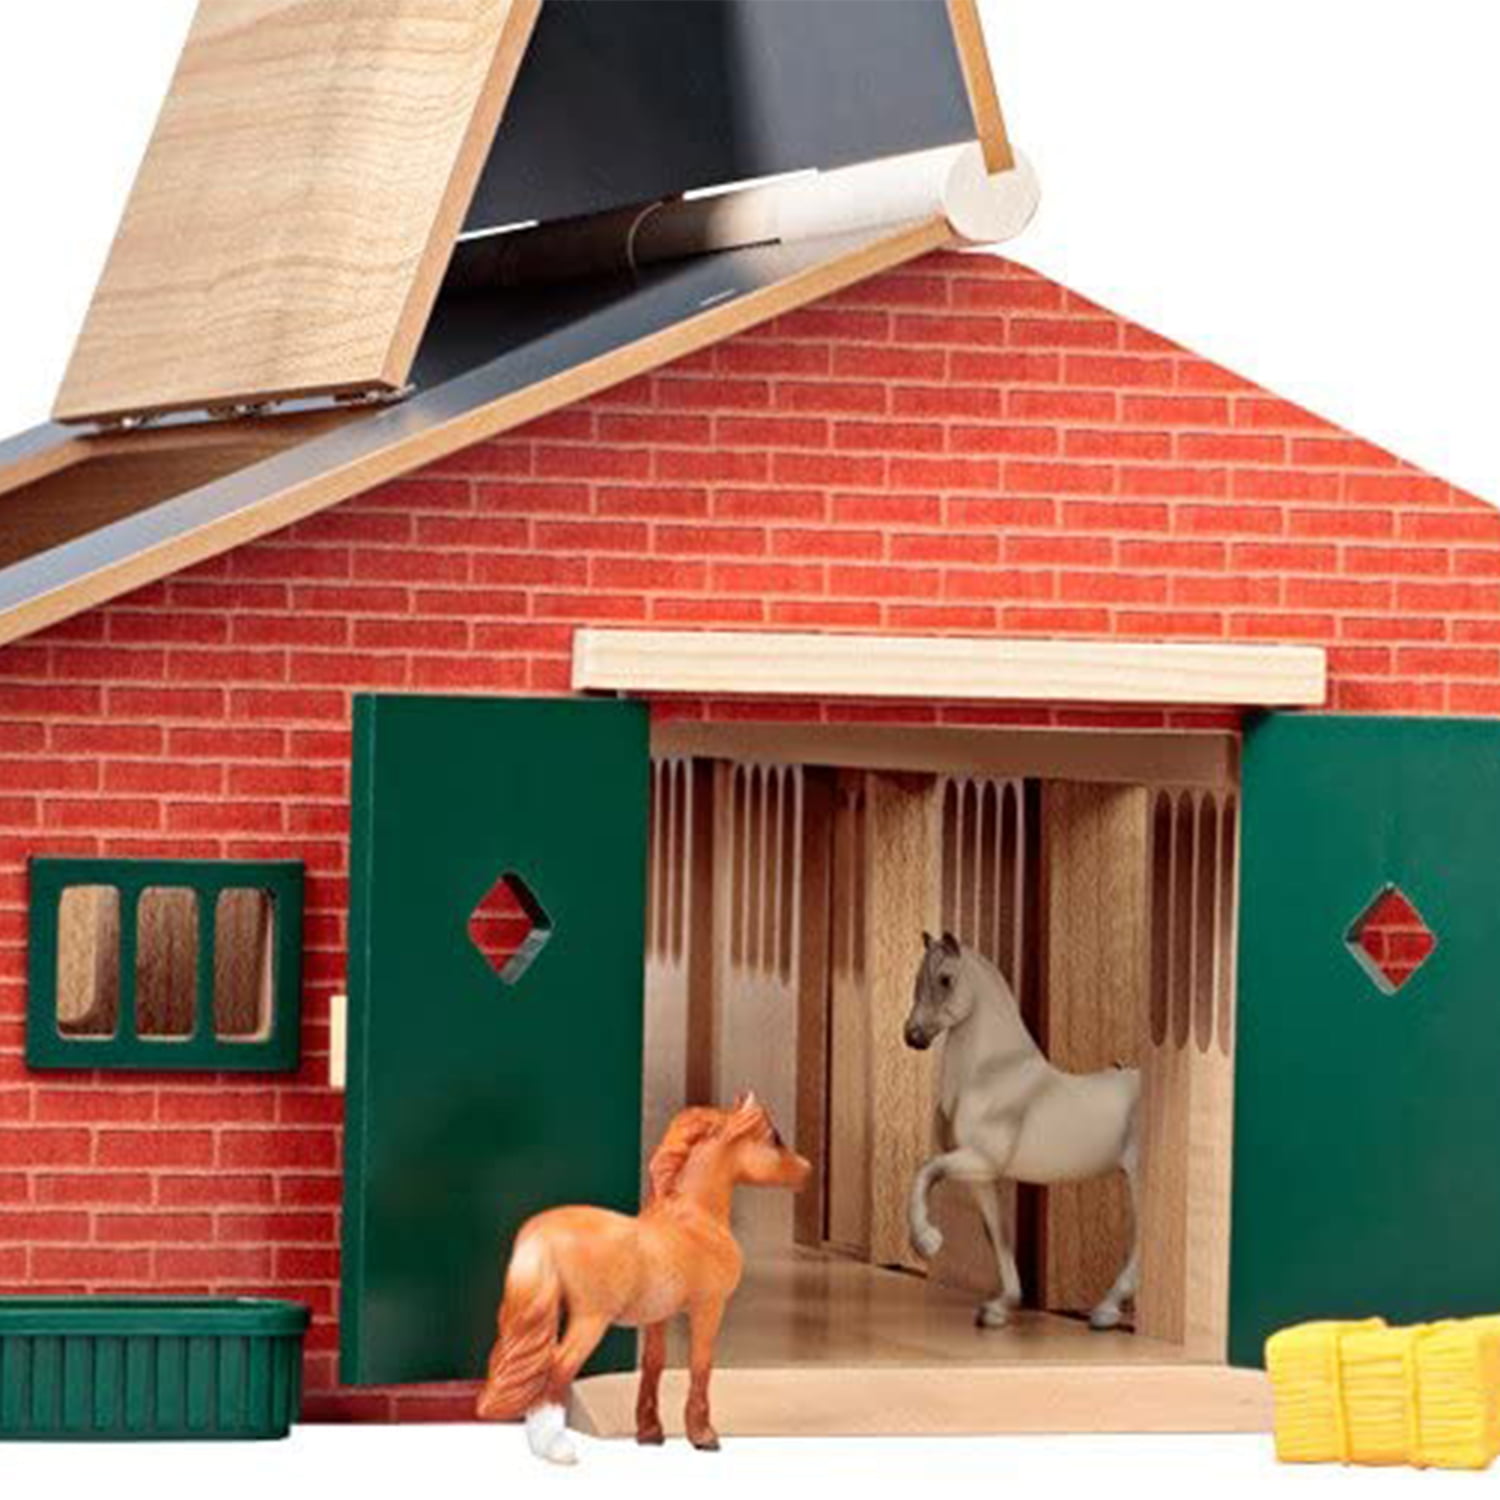 Breyer Stablemates Horse Stable Set 19 Piece Kit with 2 Horses - Walmart.com